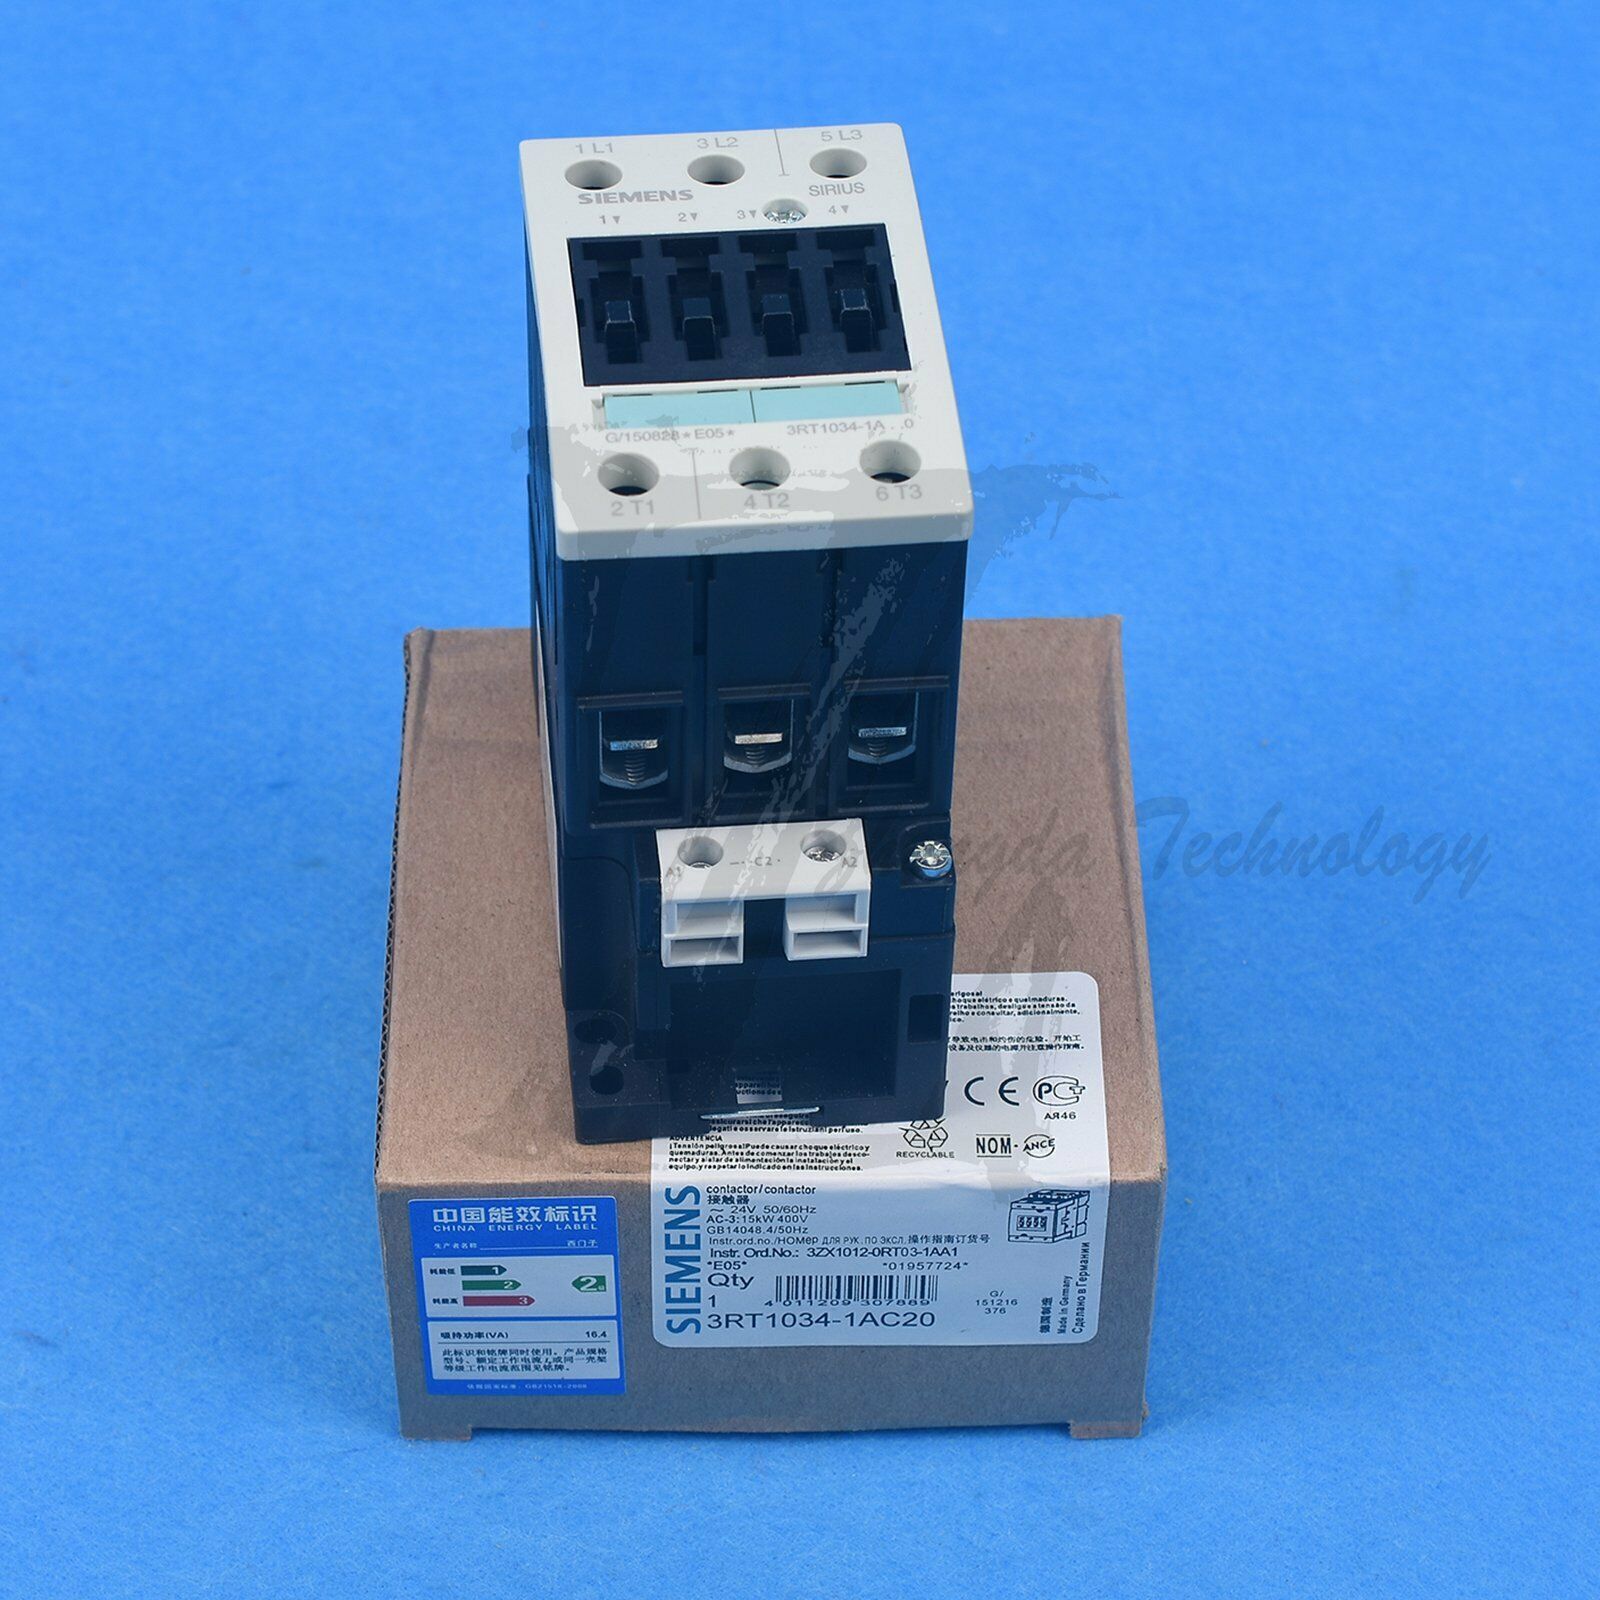 1PCS NEW SIEMENS 3RT1034-1AC20 CONTACTOR 32 AMP 3 POLE 24 VAC Free shipping KOEED 101-200, 90%, import_2020_10_10_031751, Other, Siemens